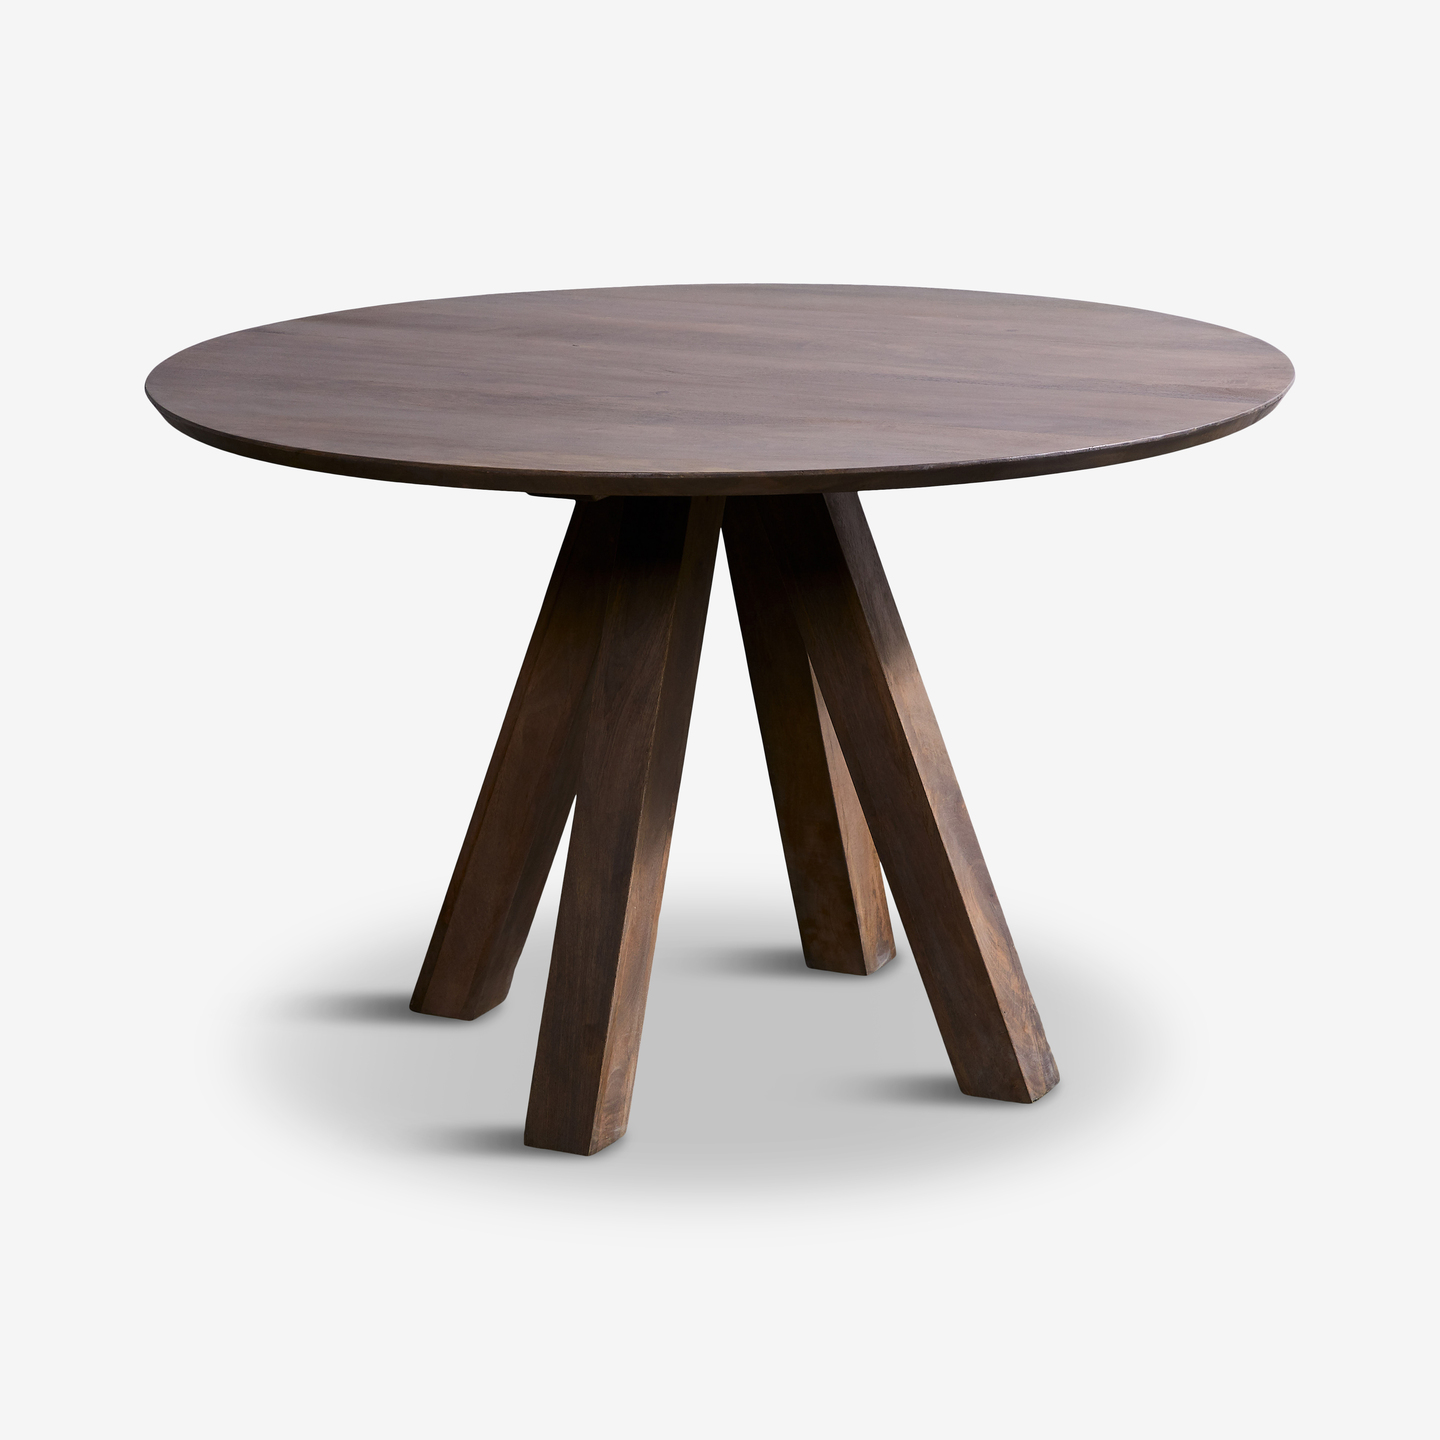 450_Trenton-Round-Dining-Table_Flat-Side_Industrial_Dining-Room-18 2020